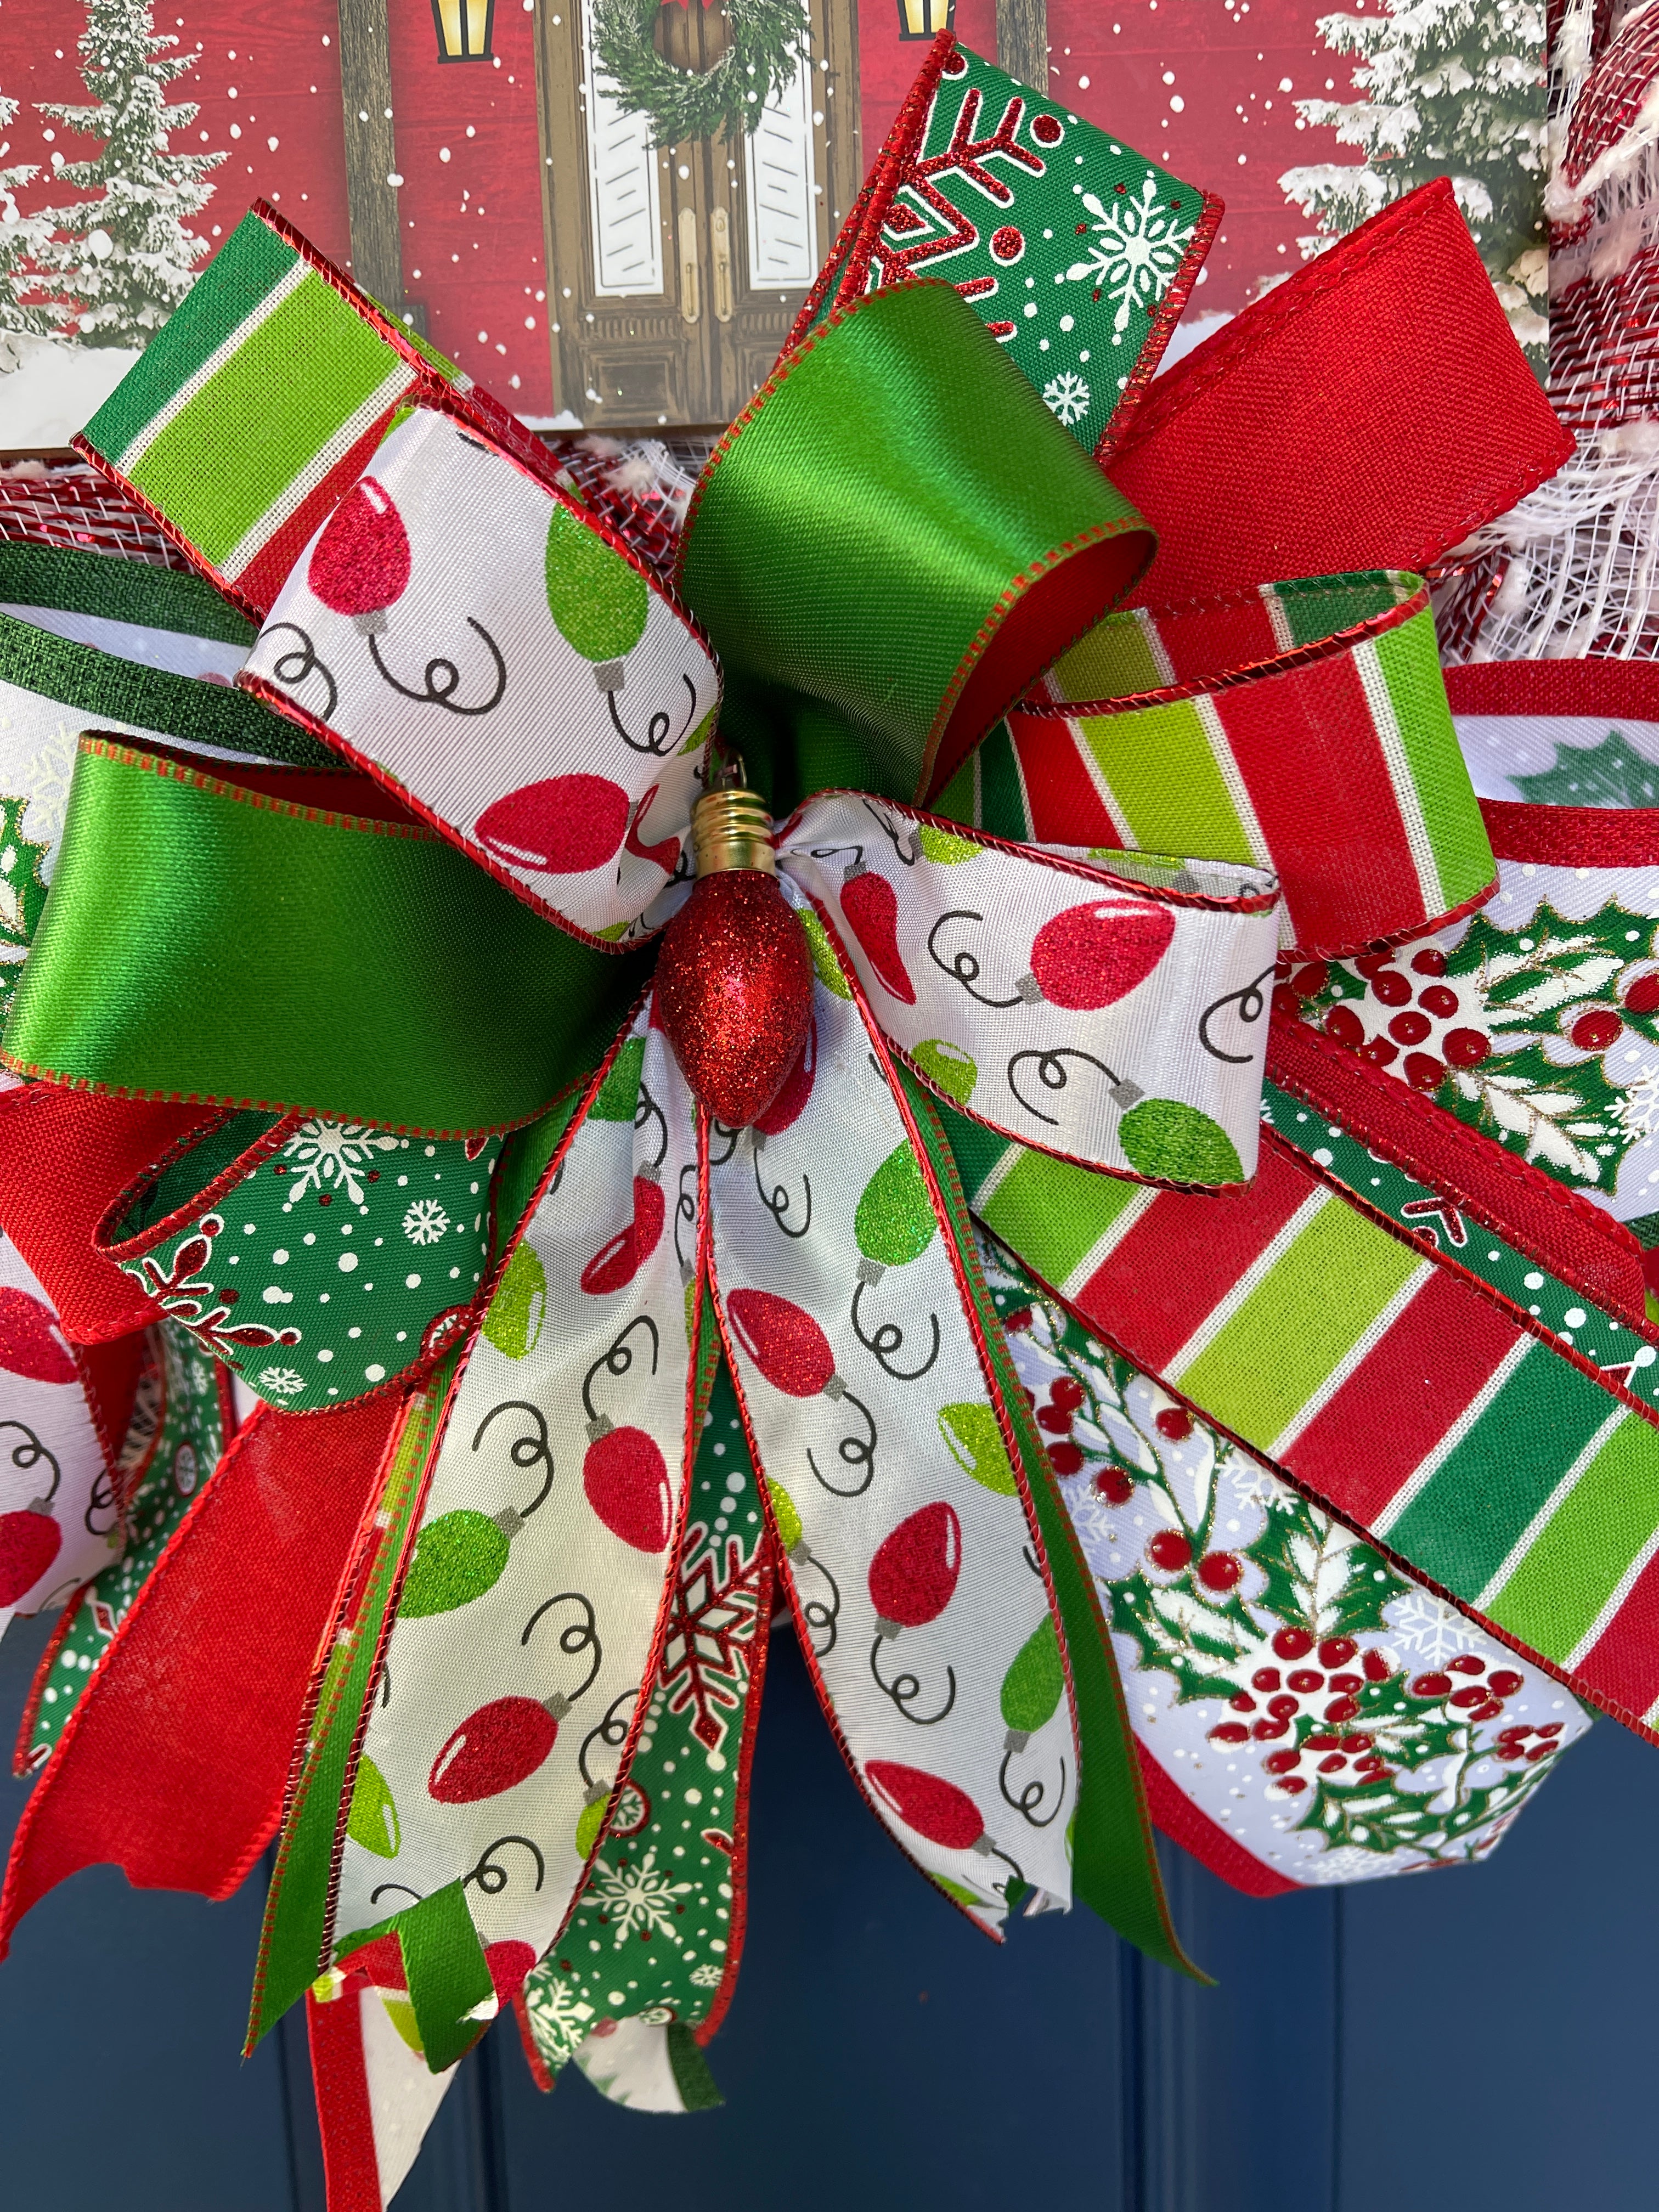 Close Up of Bow featuring a Colored Red Christmas Bulb in the Center with Red, White and Green Ribbons